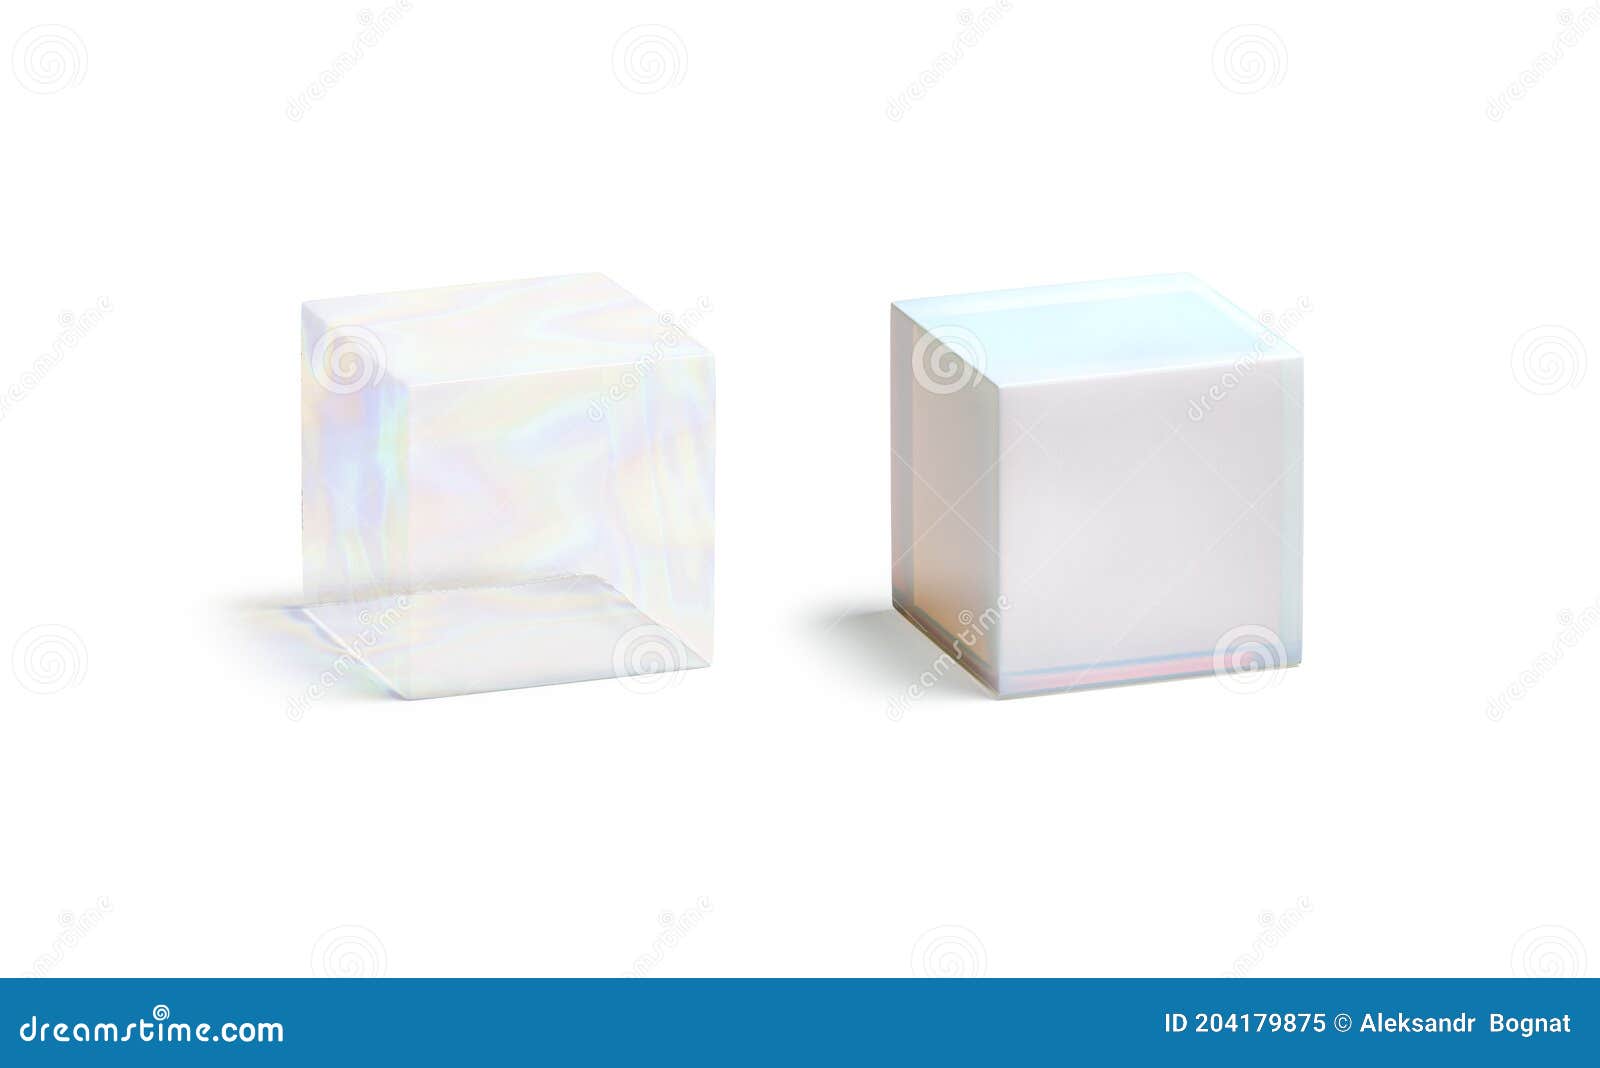 Opaque Material Stock Illustrations 113 Opaque Material Stock Illustrations Vectors Clipart Dreamstime